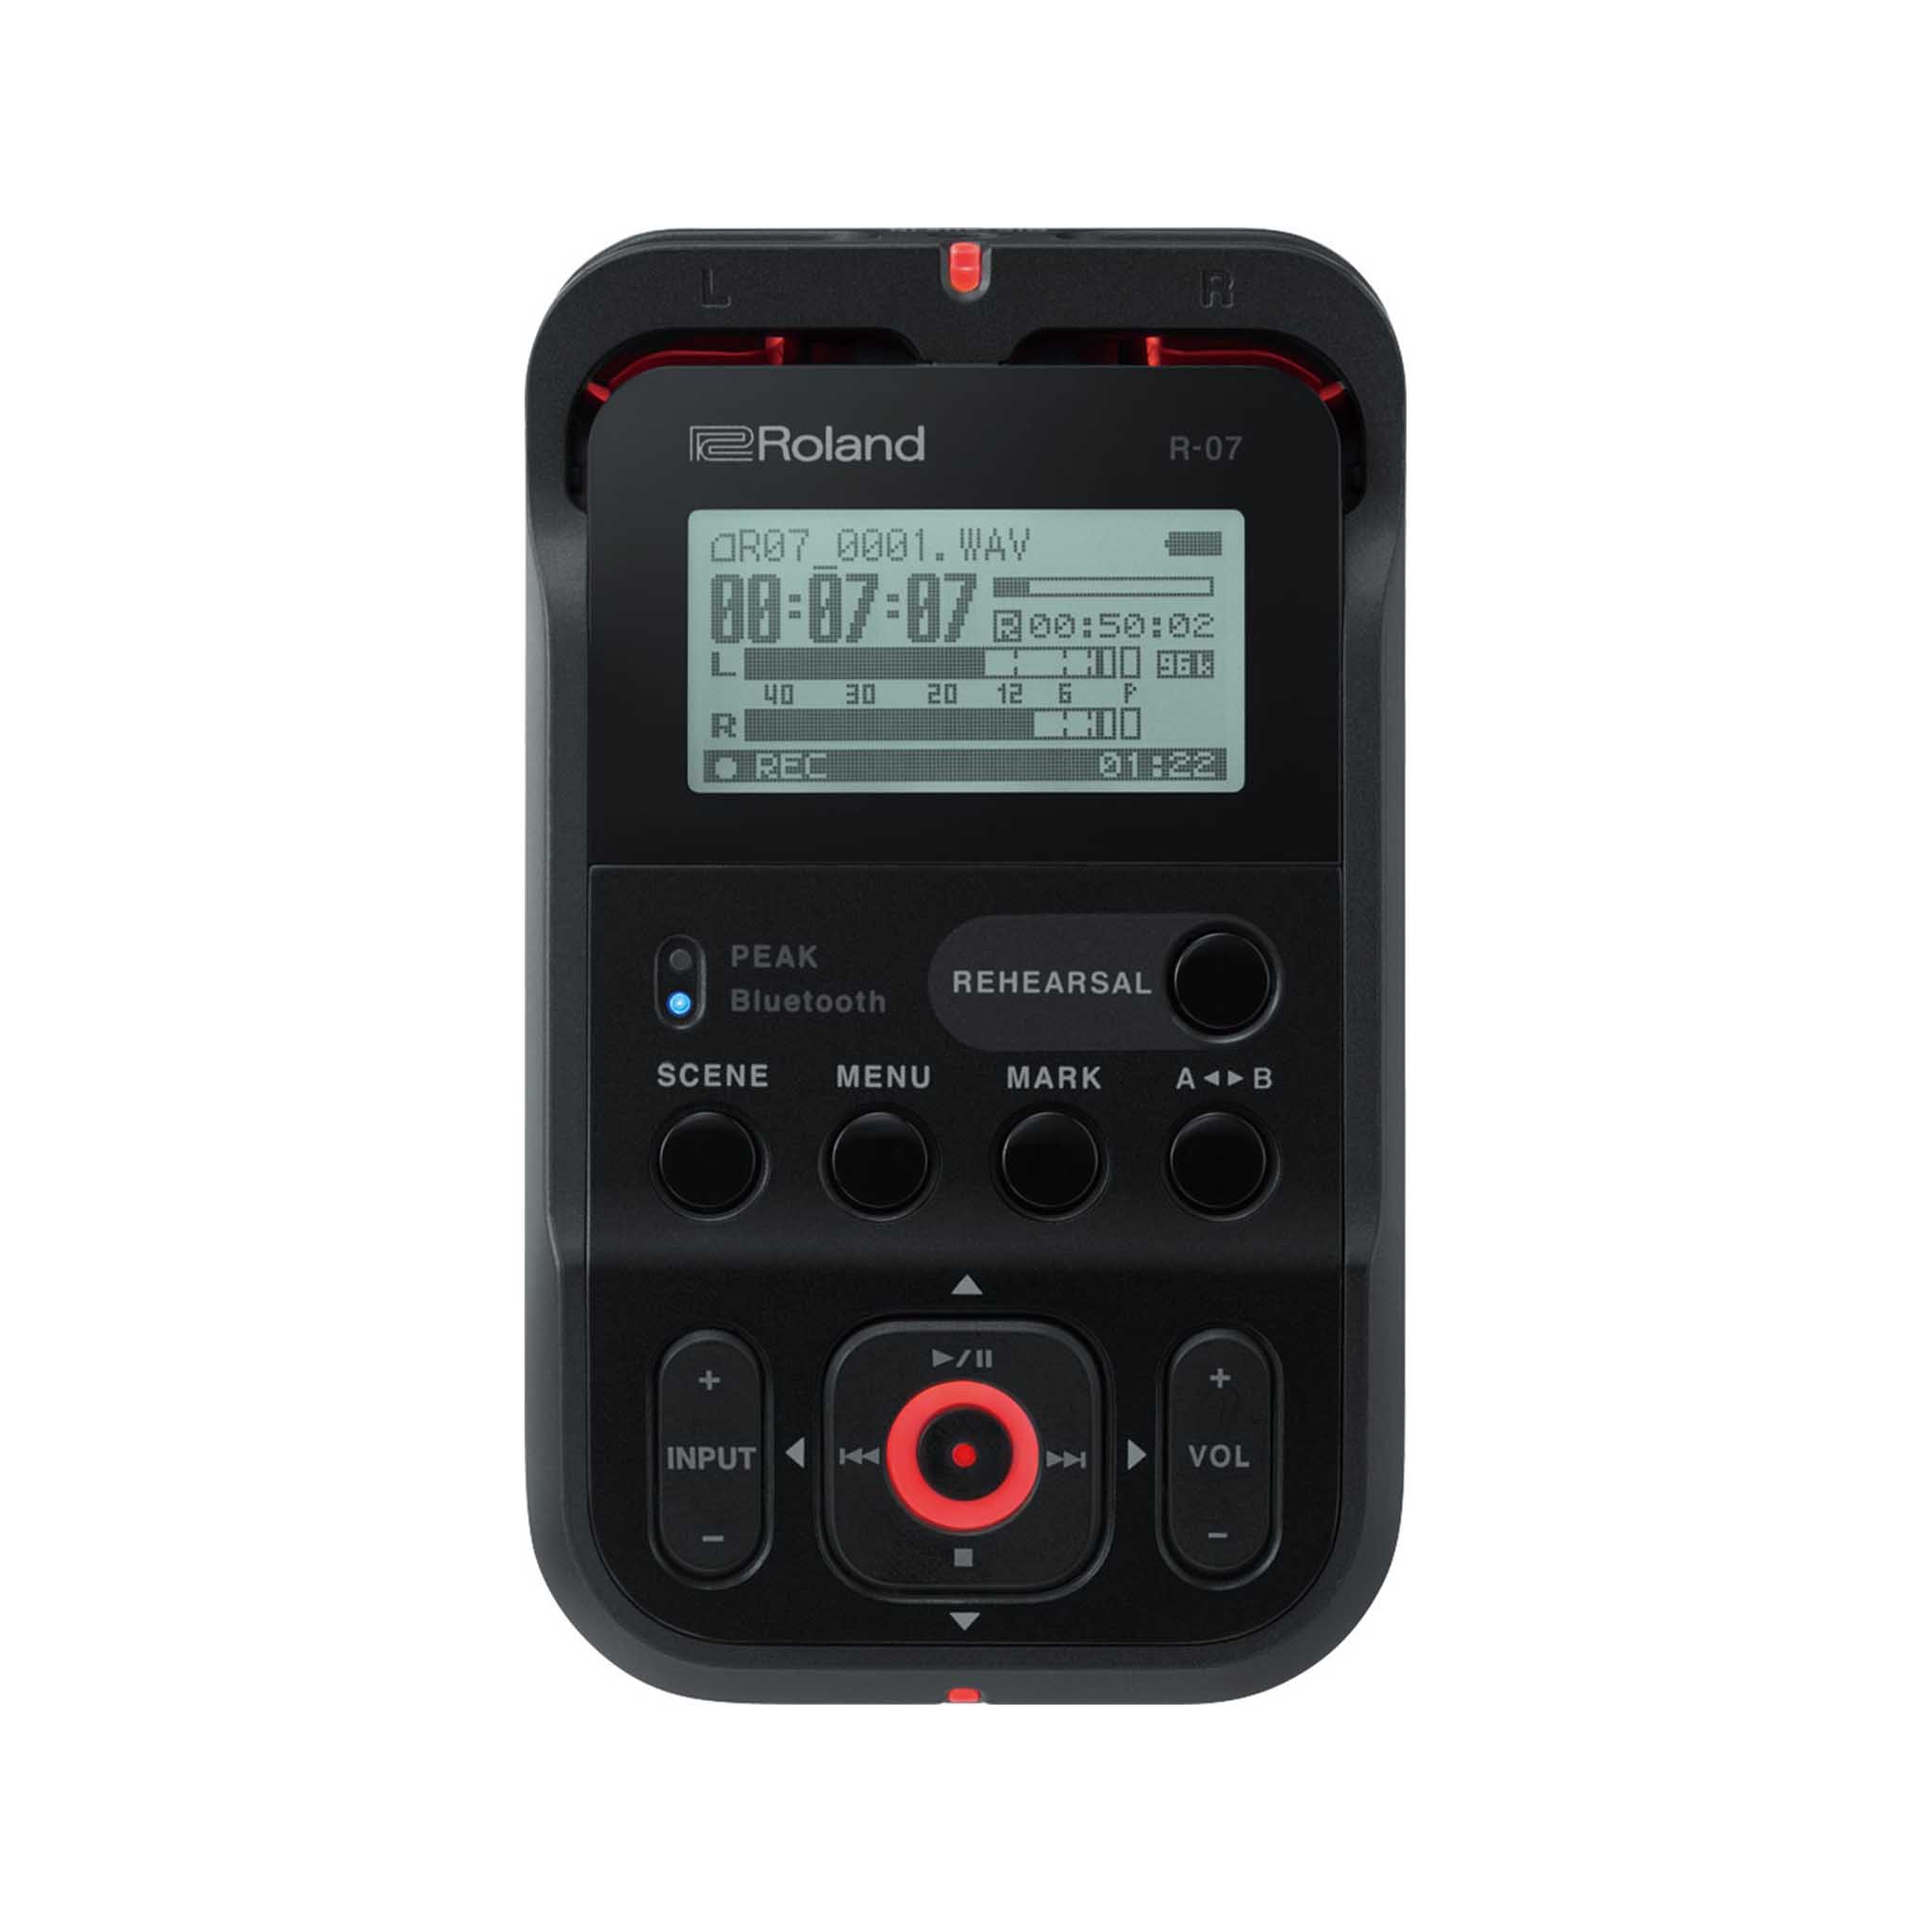 Roland R-07 Stereo Wave and MP3 Recorder